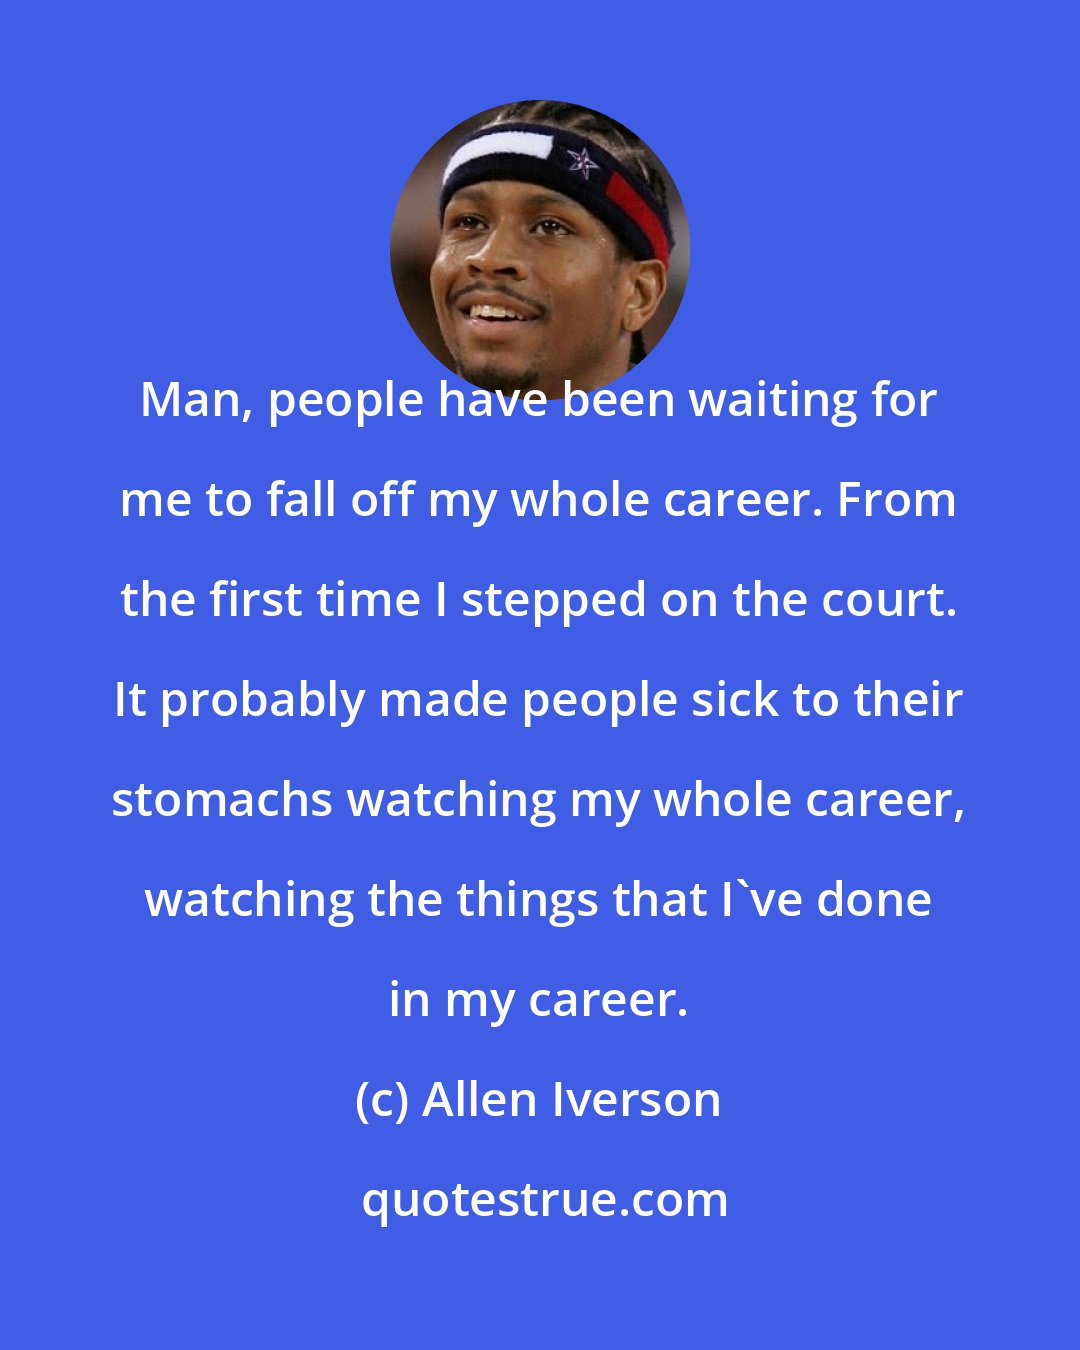 Allen Iverson: Man, people have been waiting for me to fall off my whole career. From the first time I stepped on the court. It probably made people sick to their stomachs watching my whole career, watching the things that I've done in my career.